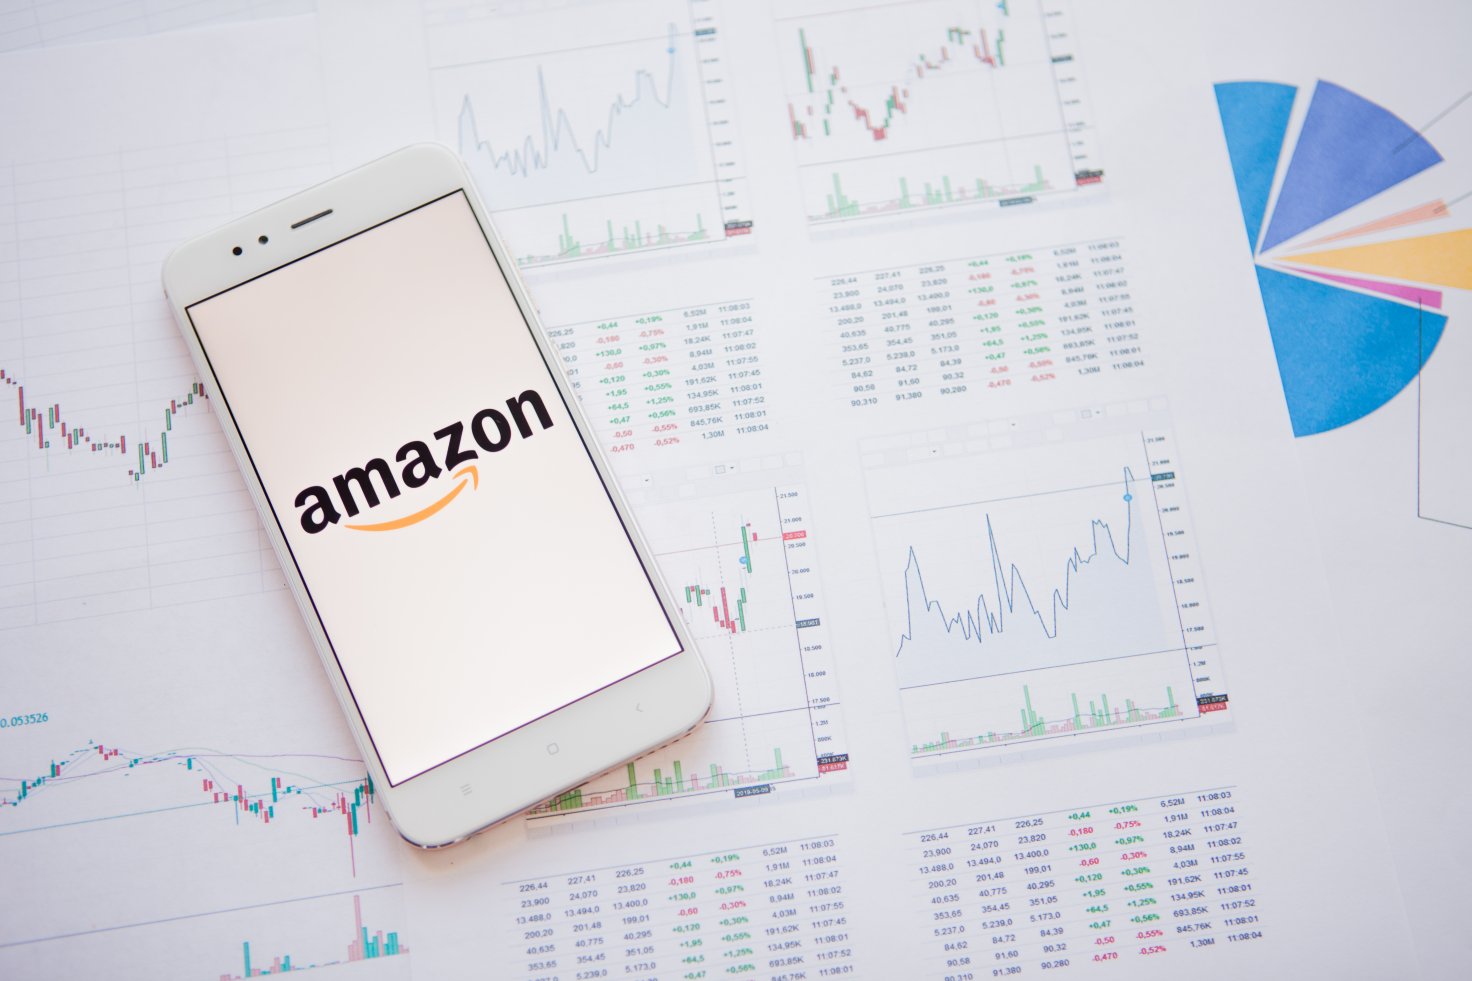 Amazon stock analysis the price could rise but with more volatility